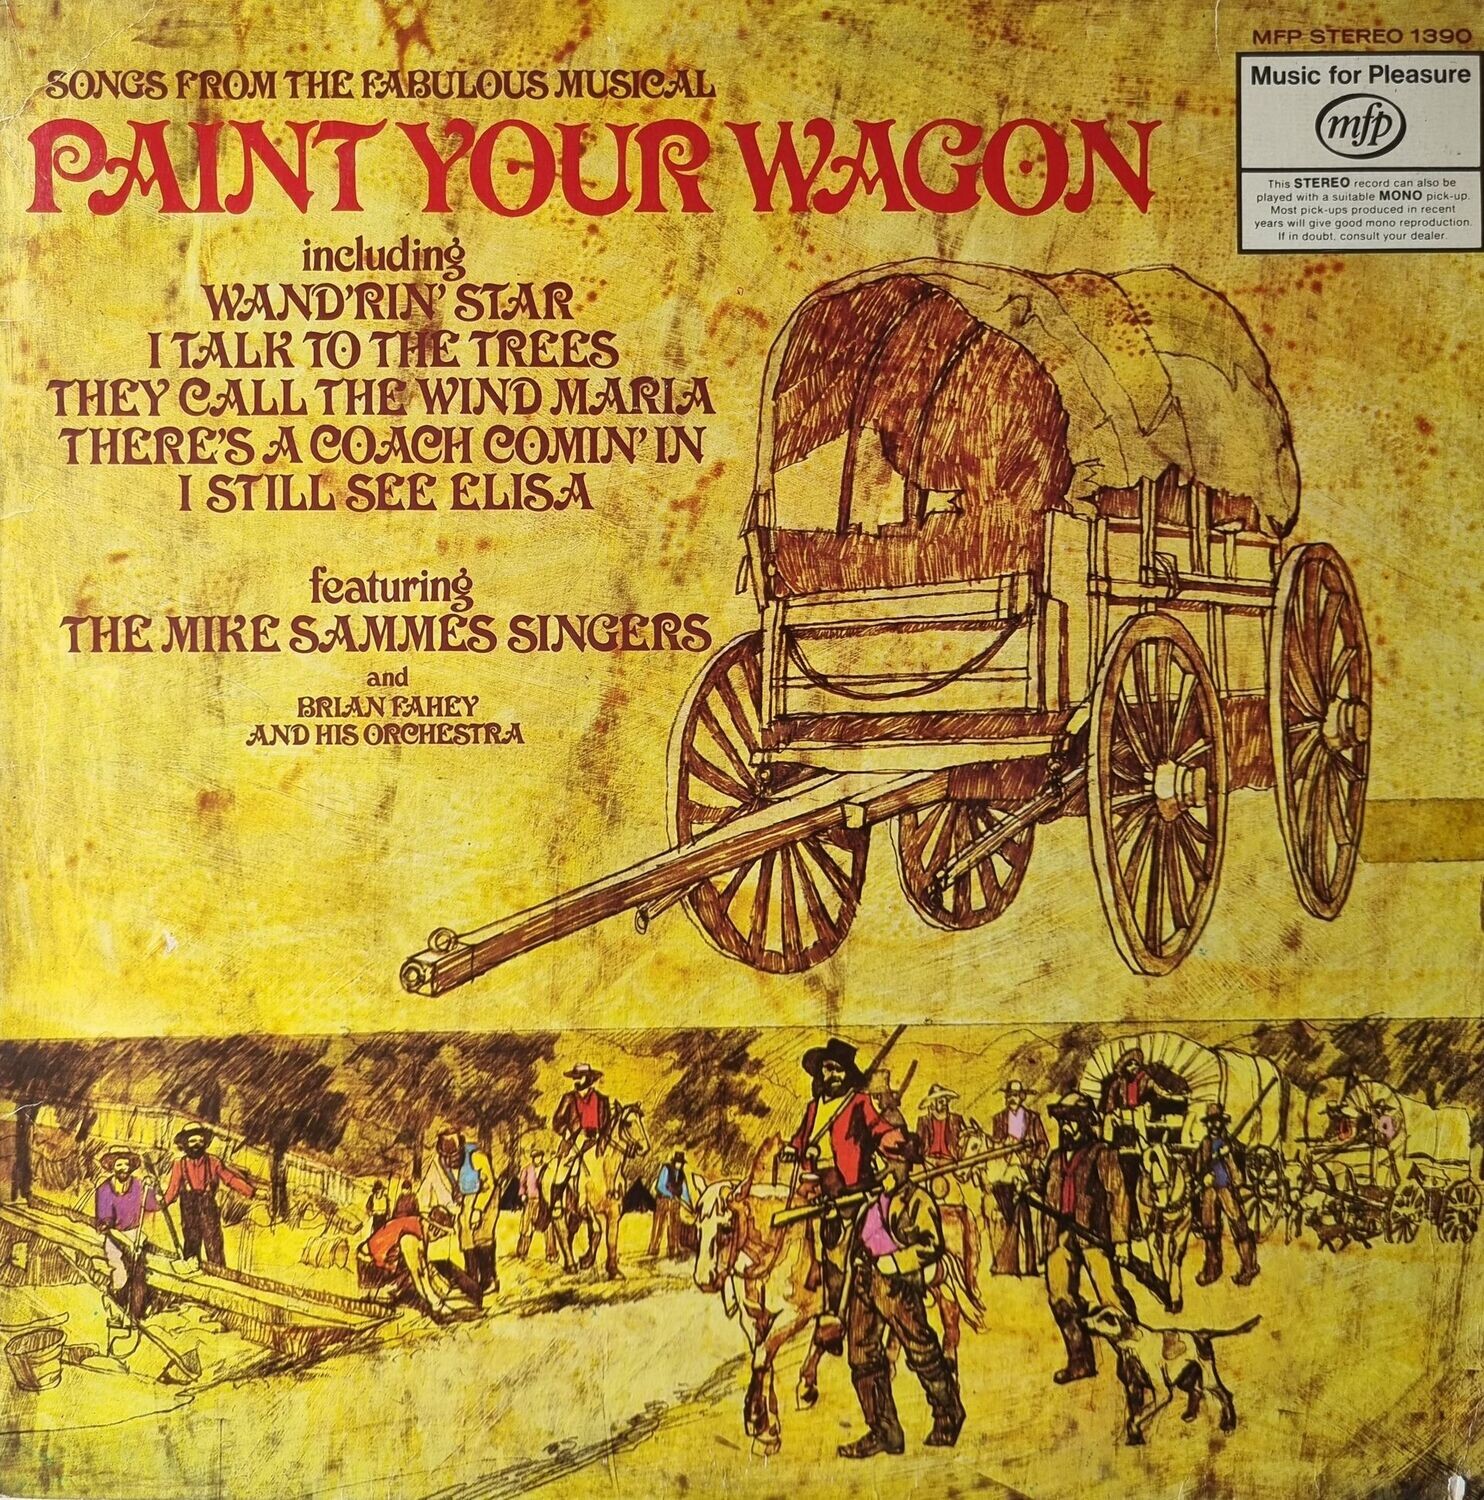 The Mike Sammes Singers And Brian Fahey And His Orchestra – Songs From The Fabulous Musical Paint Your Wagon